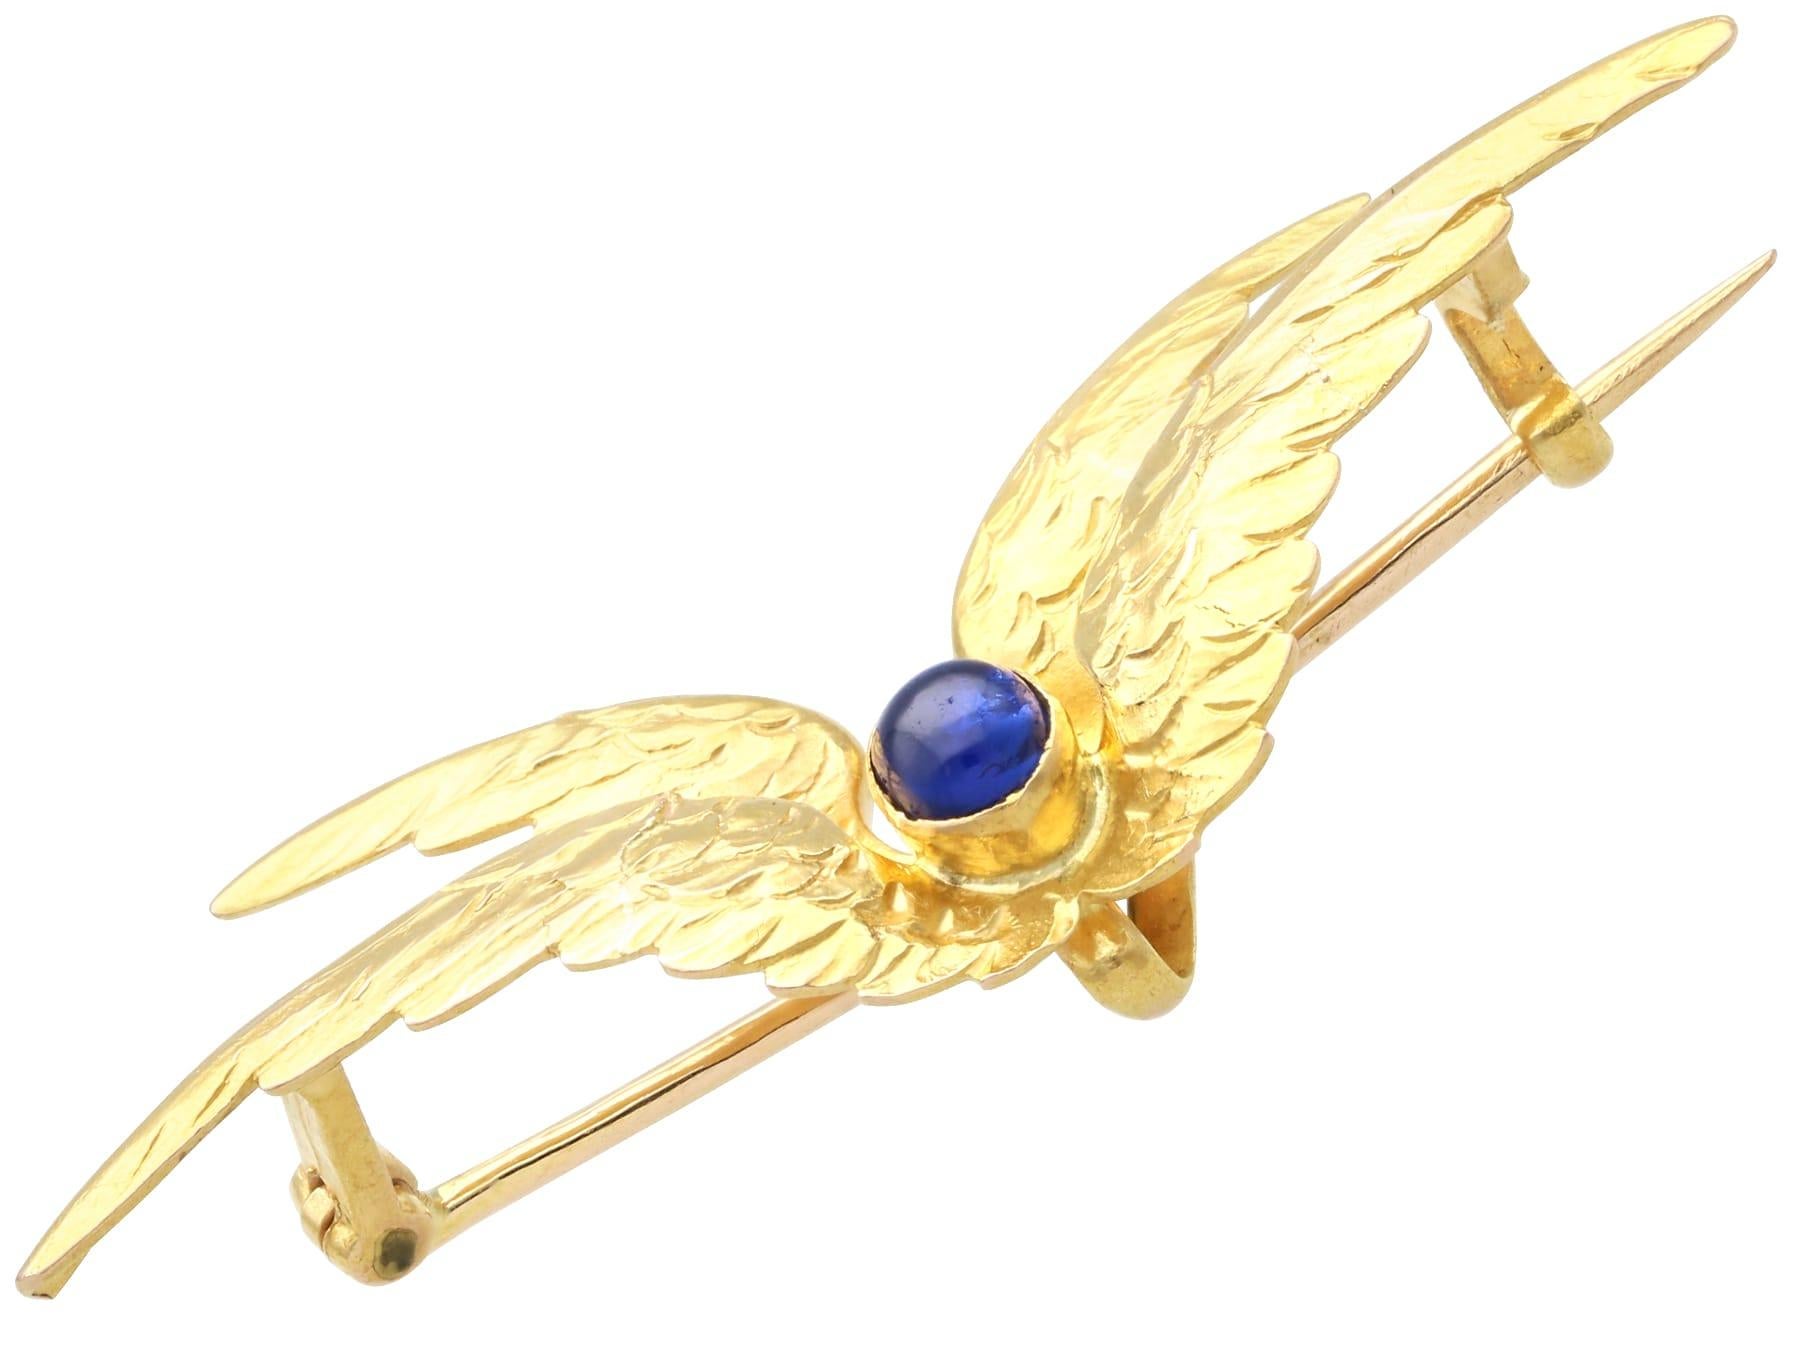 Cabochon Antique 0.26 Carat Sapphire and 21k Yellow Gold Sweetheart Brooch, circa 1900